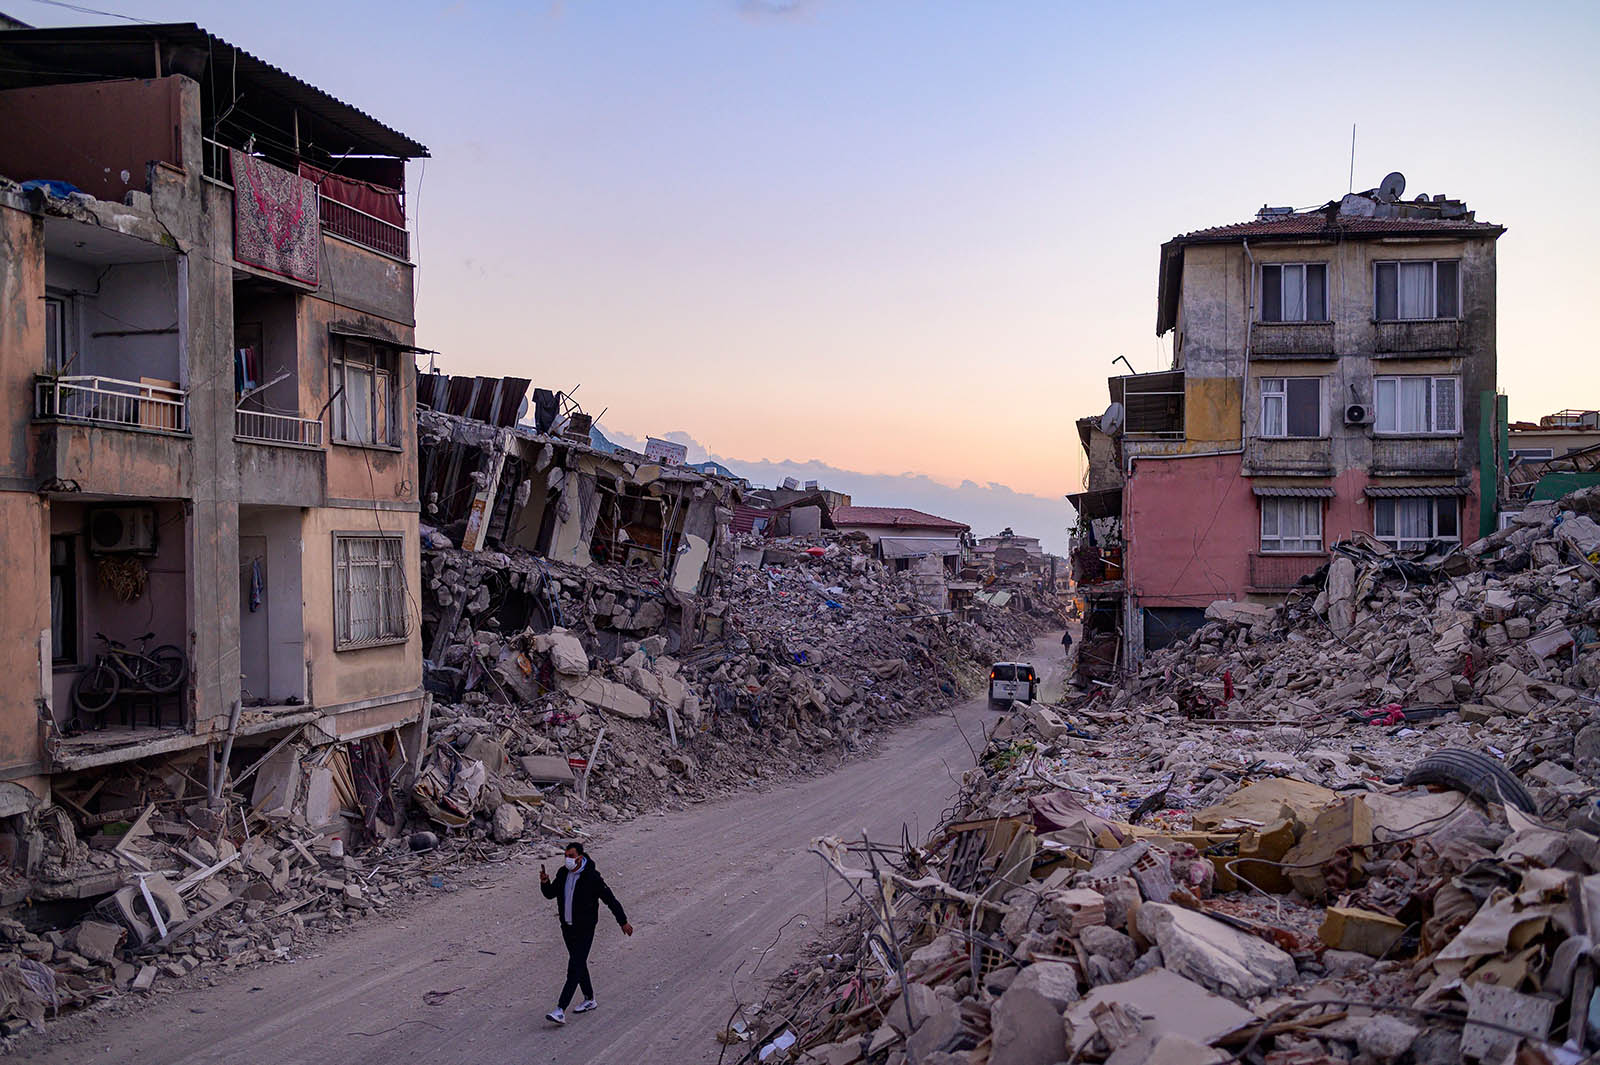 Photo of a man walking in a middle of collapsed buildings with a face mask on.